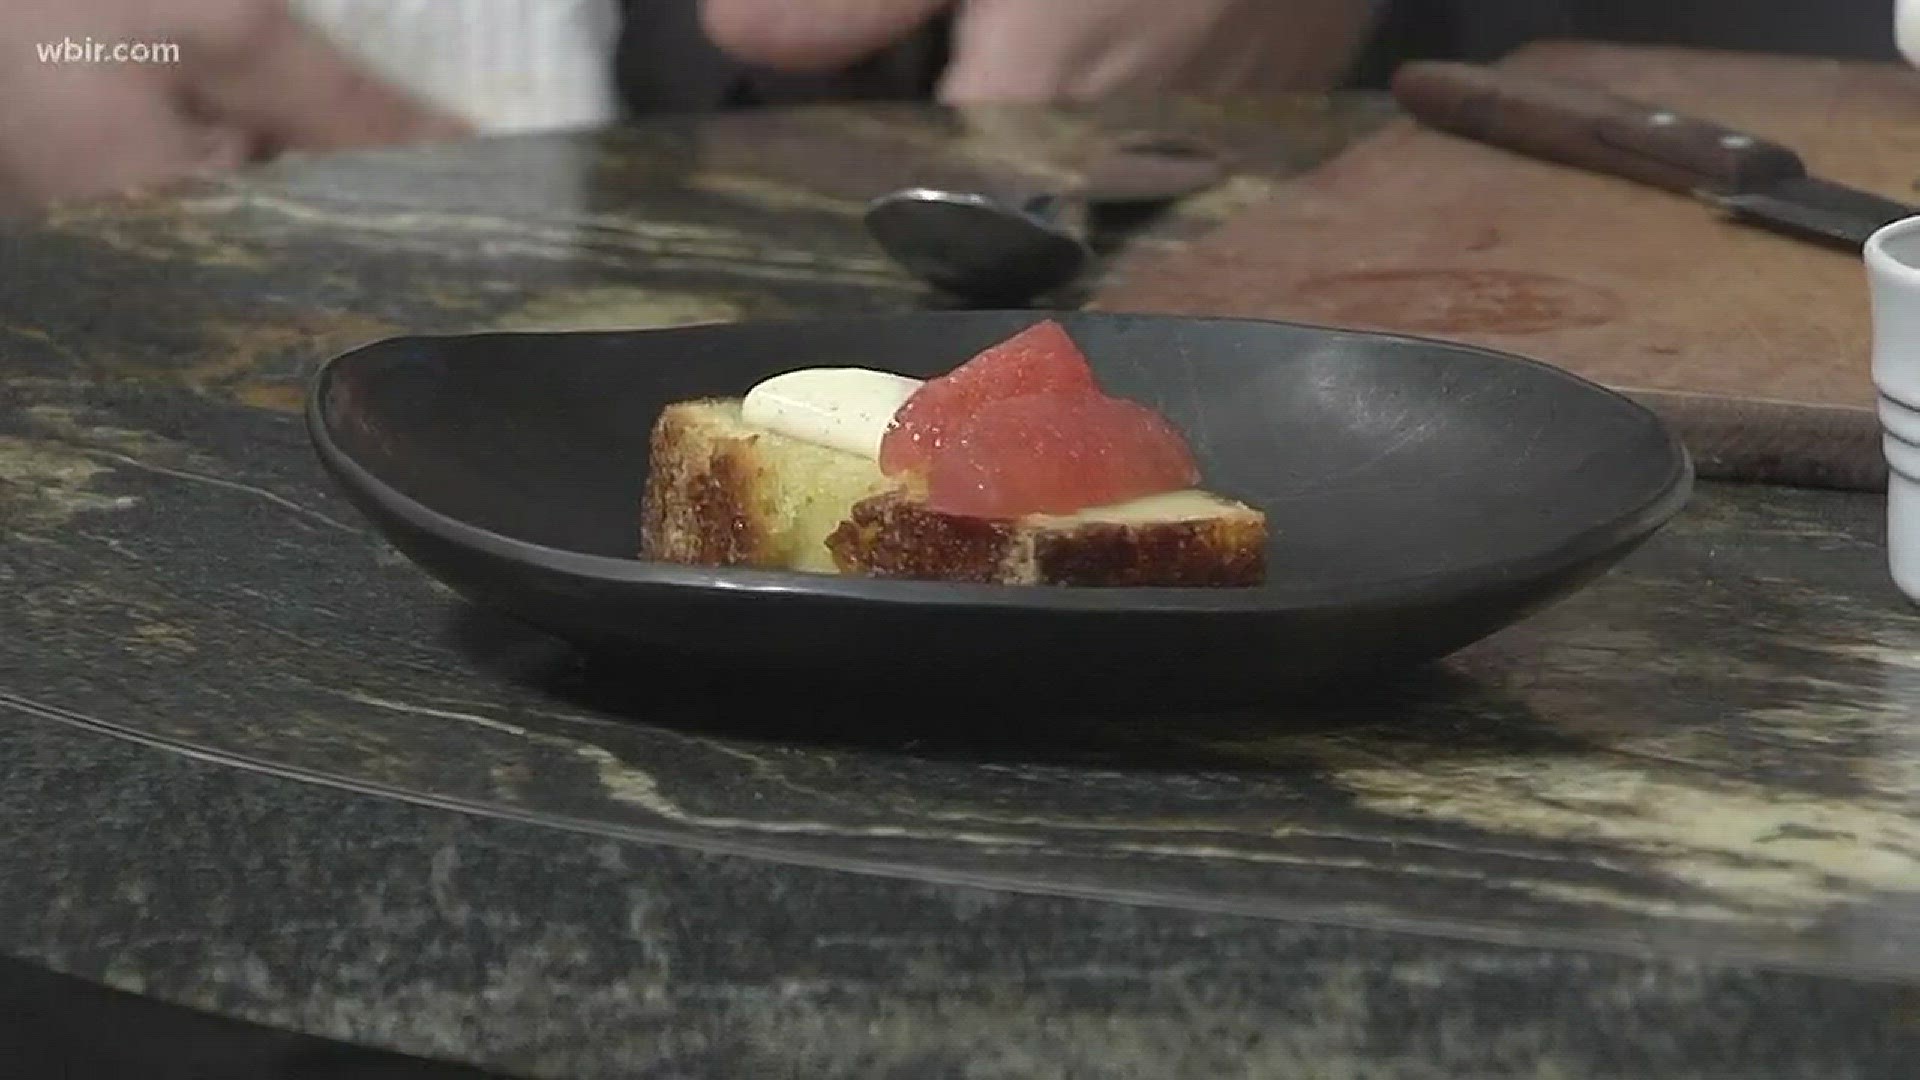 Blackberry Farm makes a pound cake with olive oil instead of butter